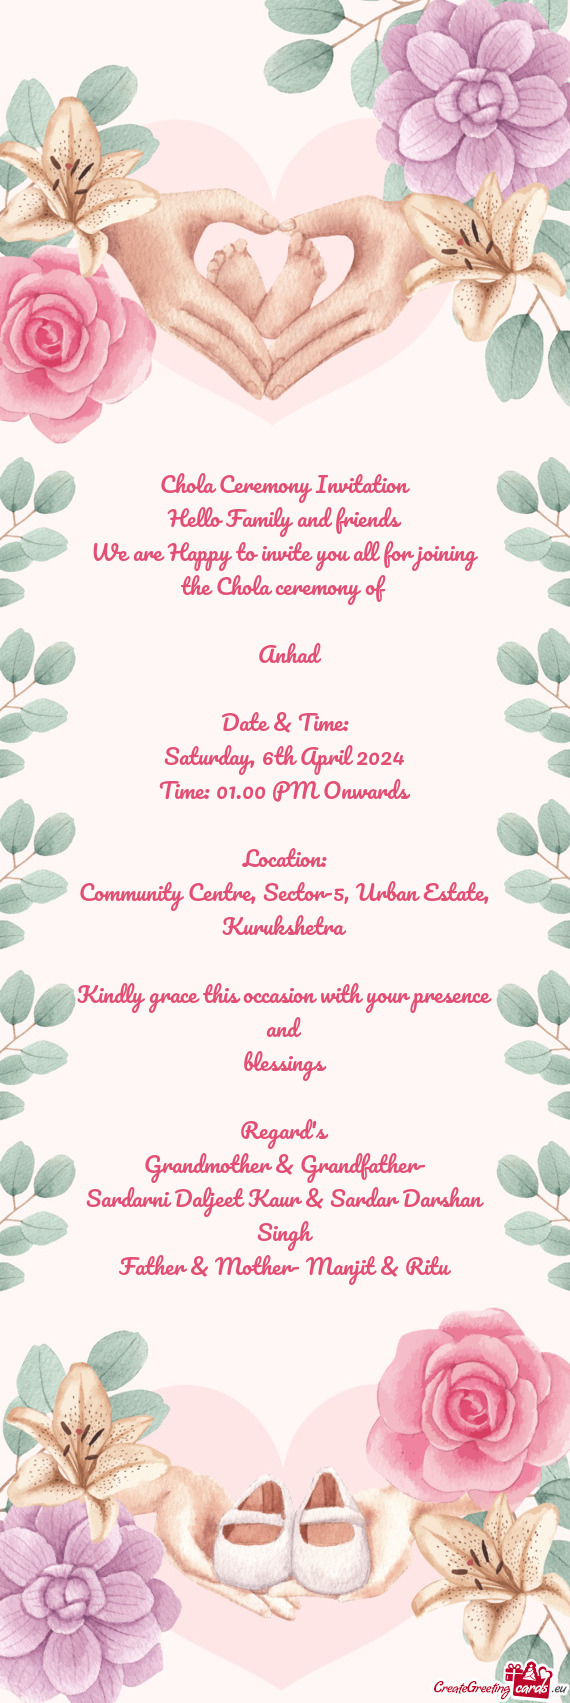 We are Happy to invite you all for joining the Chola ceremony of